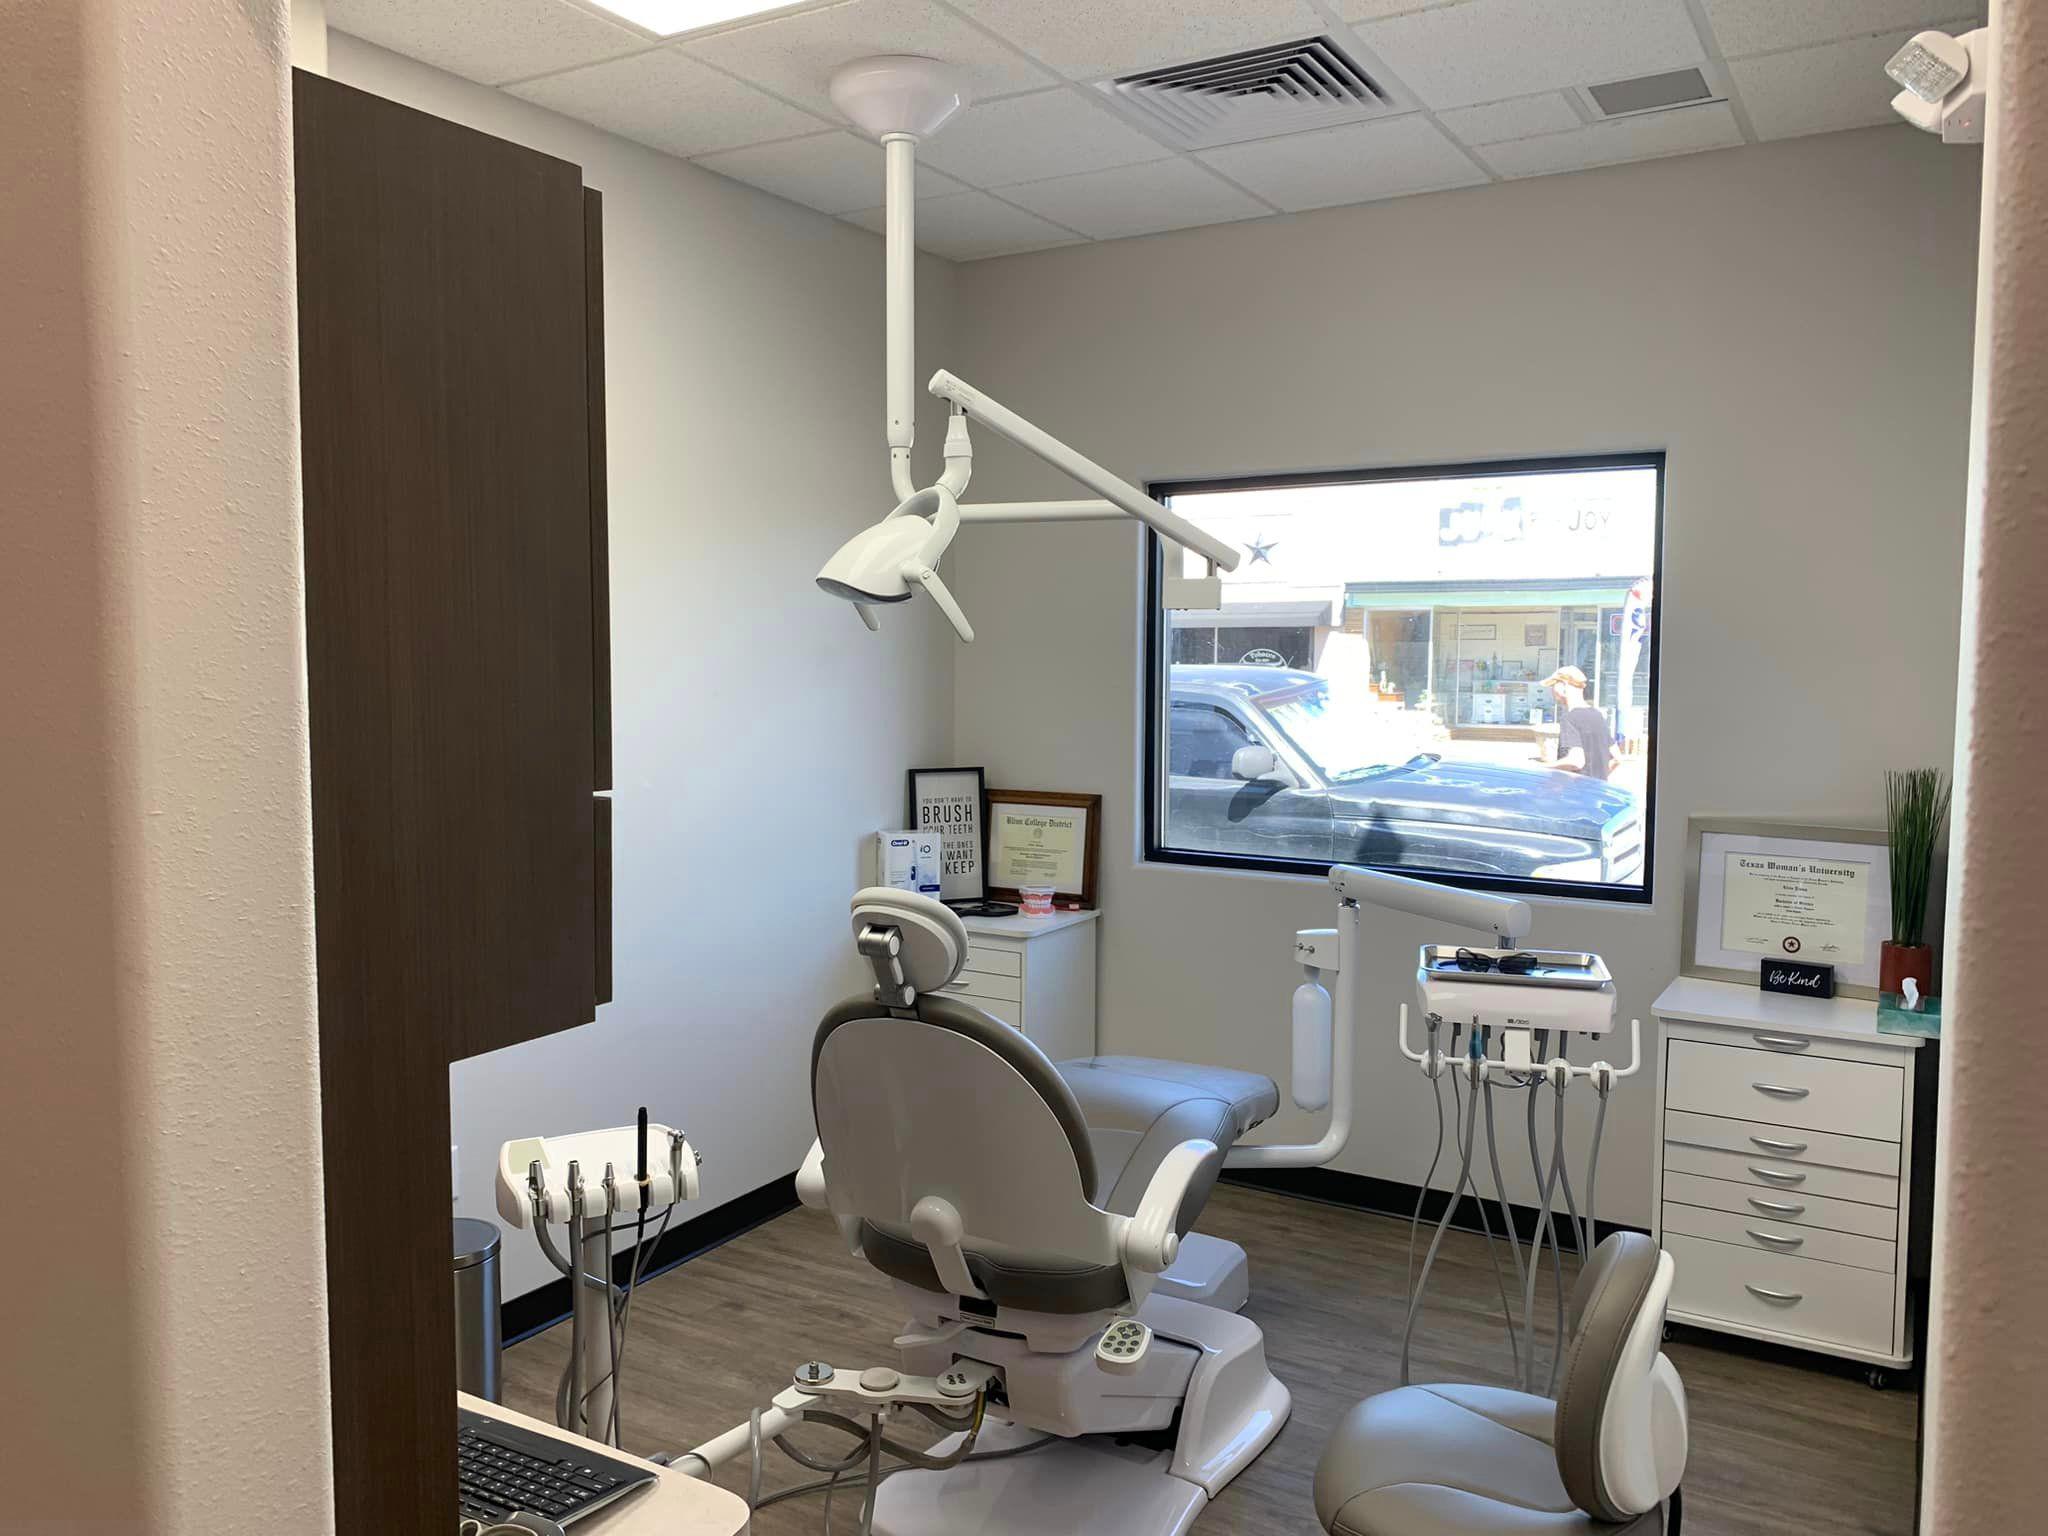 Main Street Dental
321 S Main St. McGregor, TX 76657
https://mcgregorsmiles.com

Dr. John Shultz and Dr. Claudia Raimondo offer general dentistry, restorative dentistry, cosmetic dentistry, and orthodontics. Our patient-centered and family friendly dental office provides comfortable, compassionate care in a clean, modern facility right in the heart of McGregor, TX on Main Street.